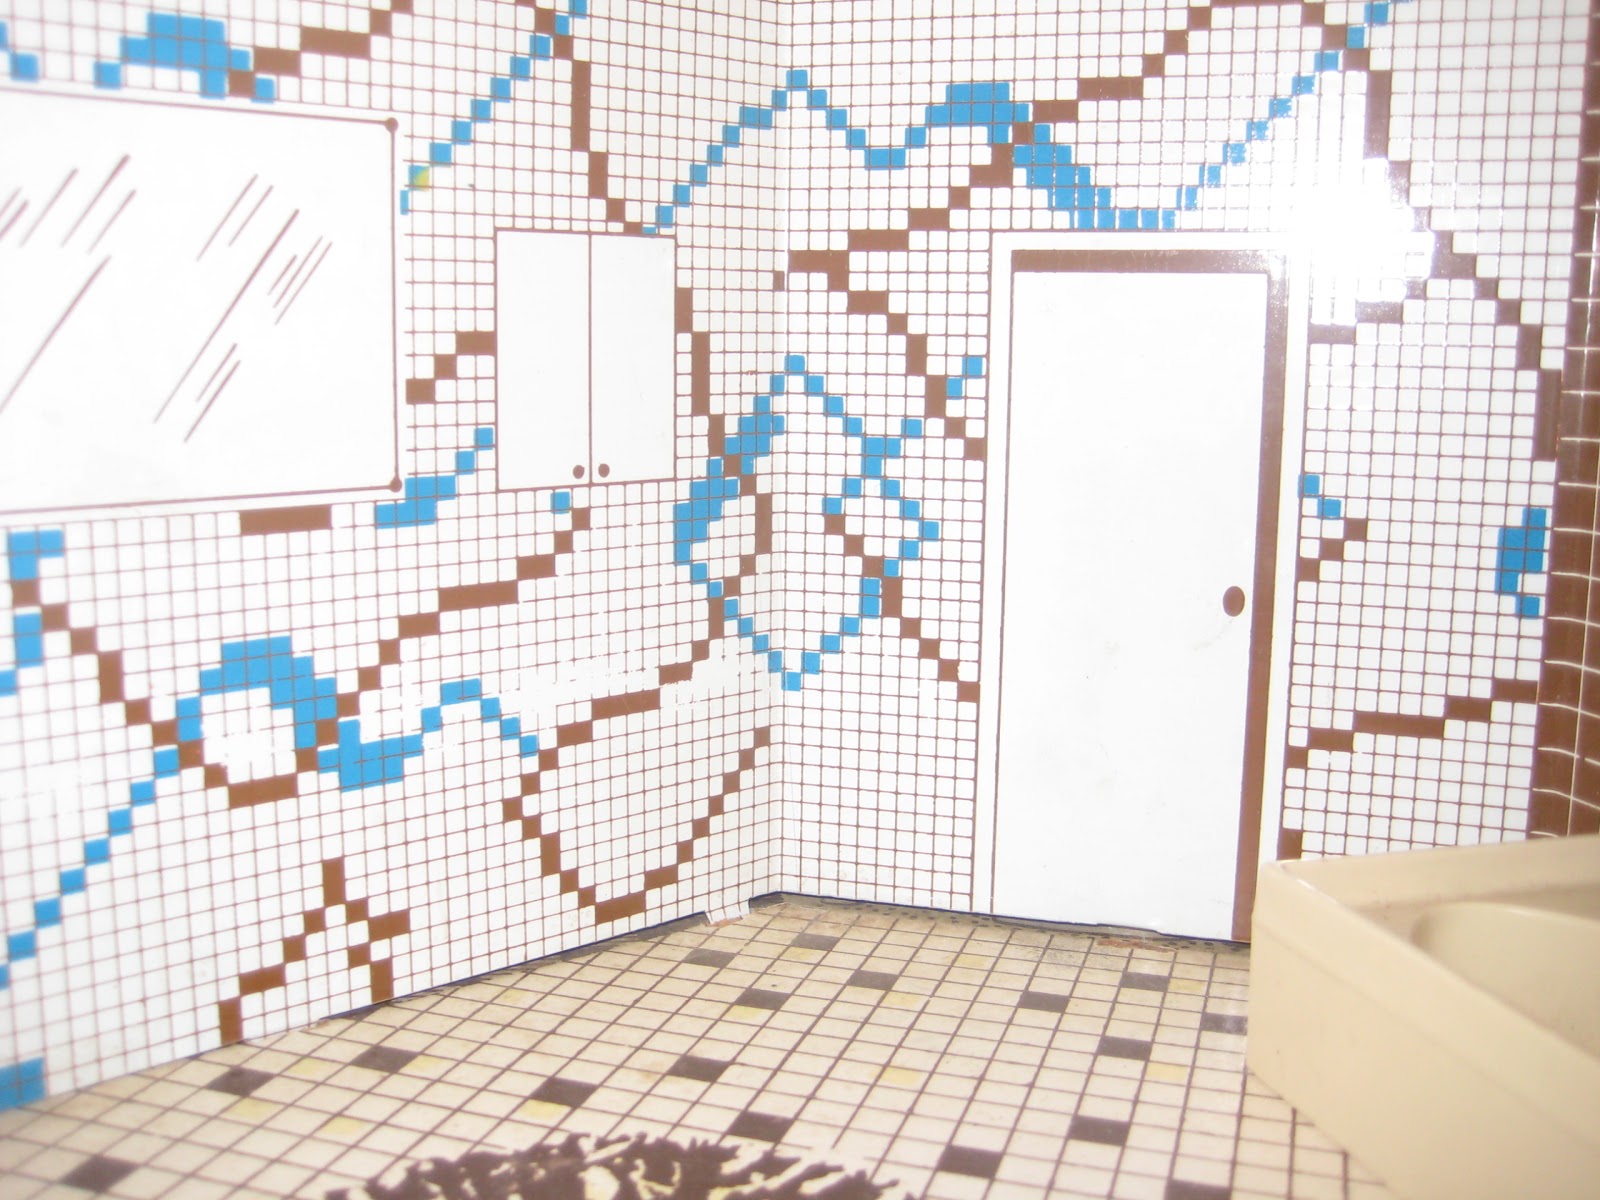 Notice the Mid century modern abstract tile pattern in the bathroom.